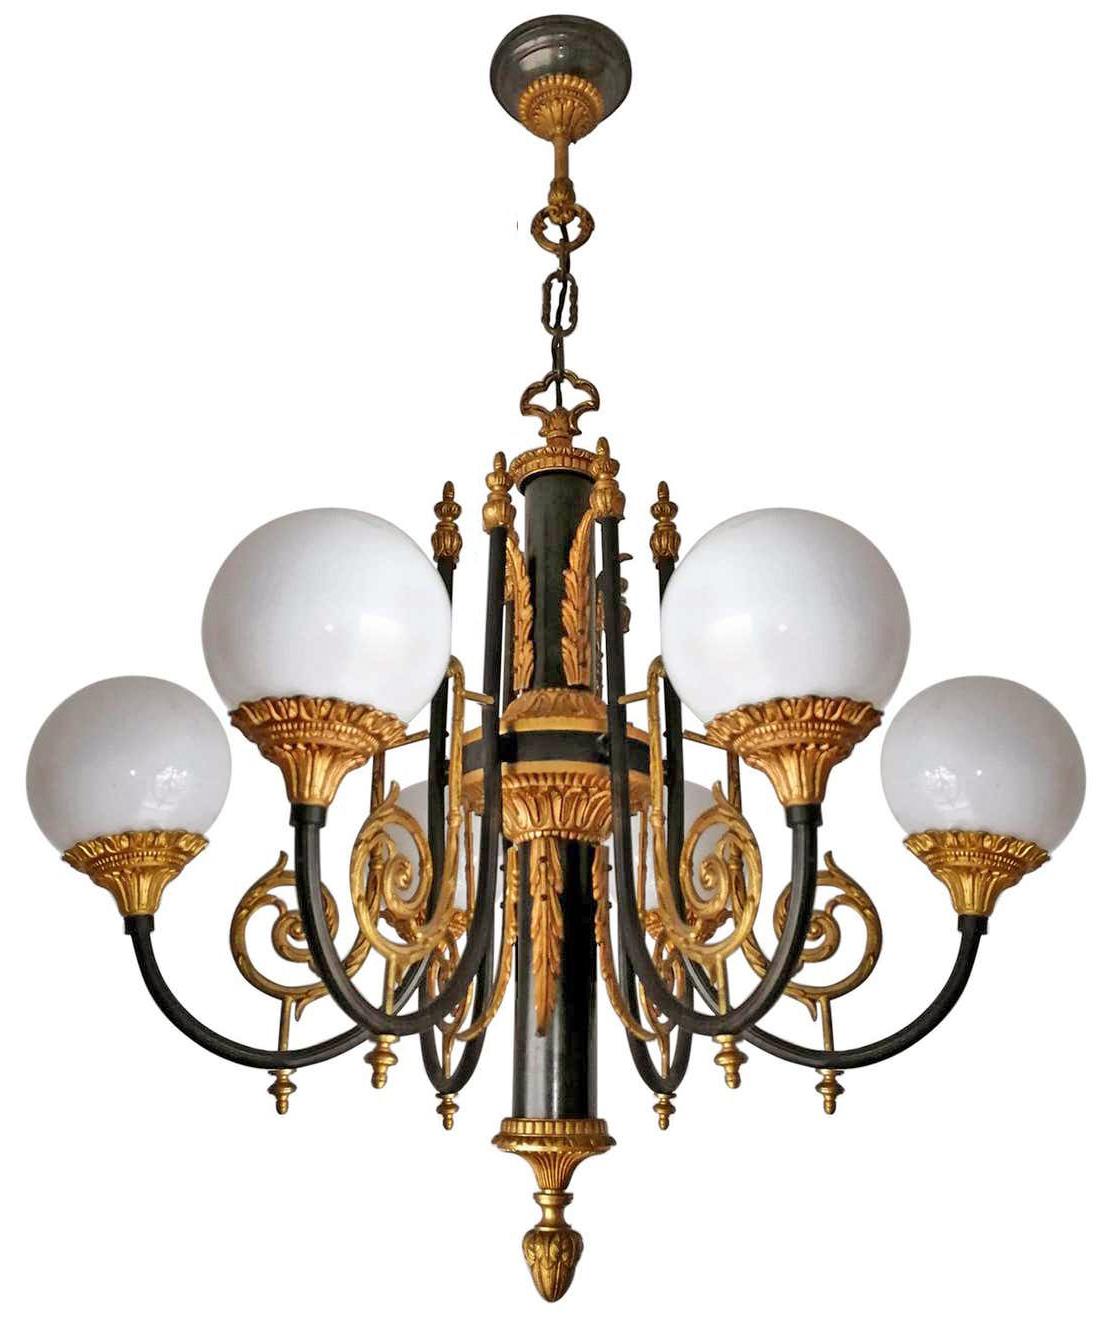 Pair of Antique French Empire Neoclassical Chandelier w Gilt & Patina Bronze PPU For Sale 2